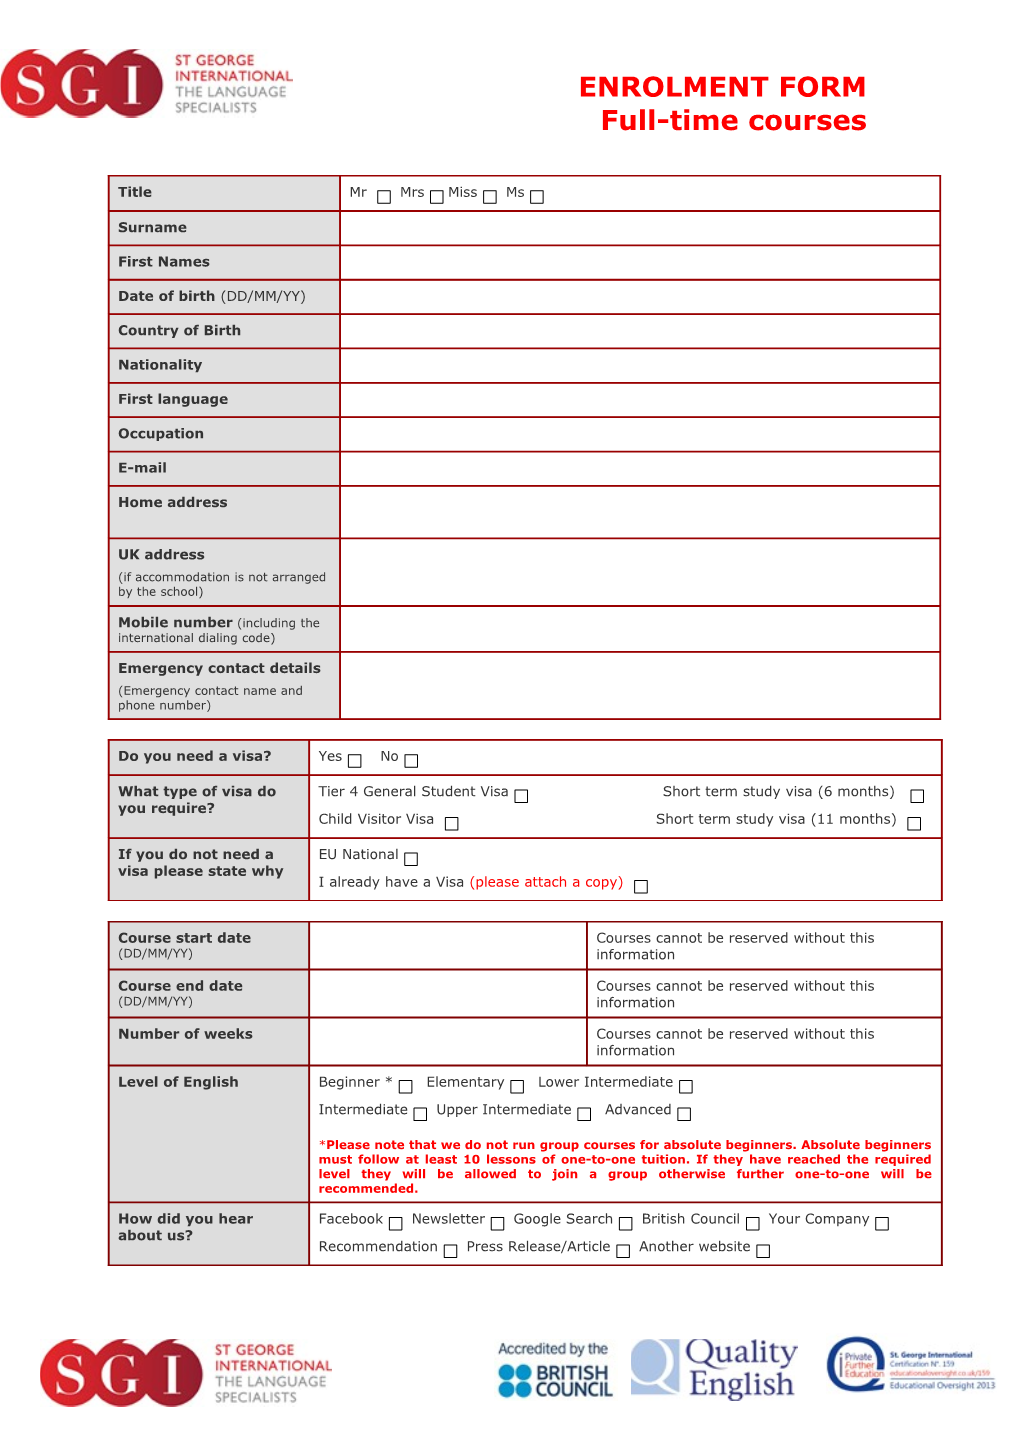 By Completing This Form You Agree to Our Terms and Conditions